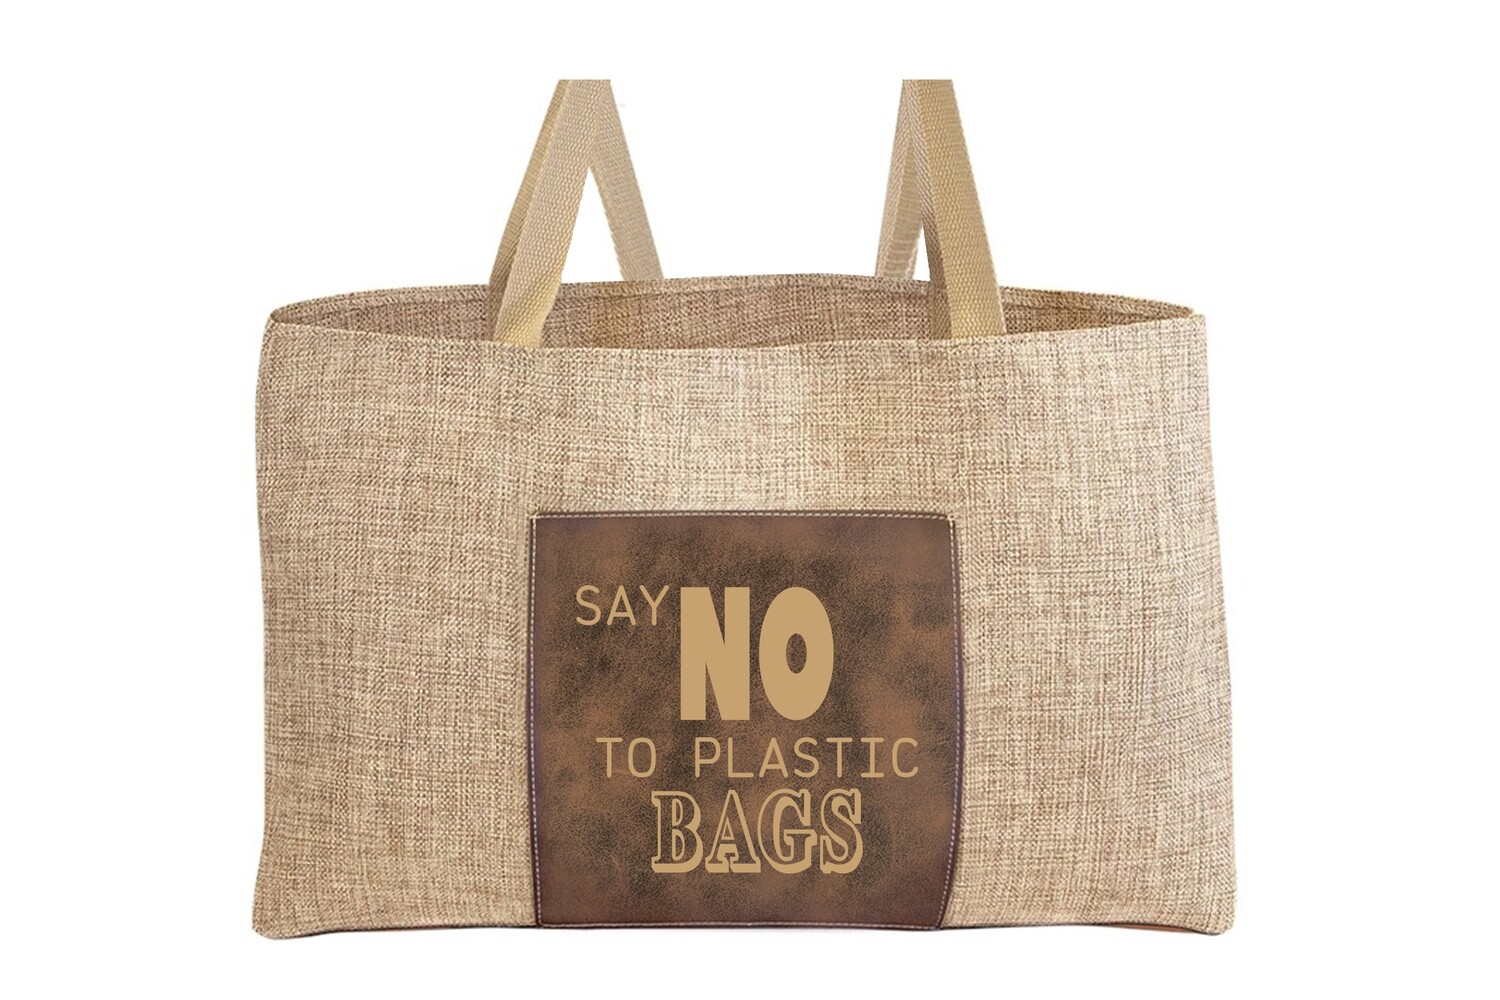 Burlap Tote Bag with Say NO to Plastic Bags